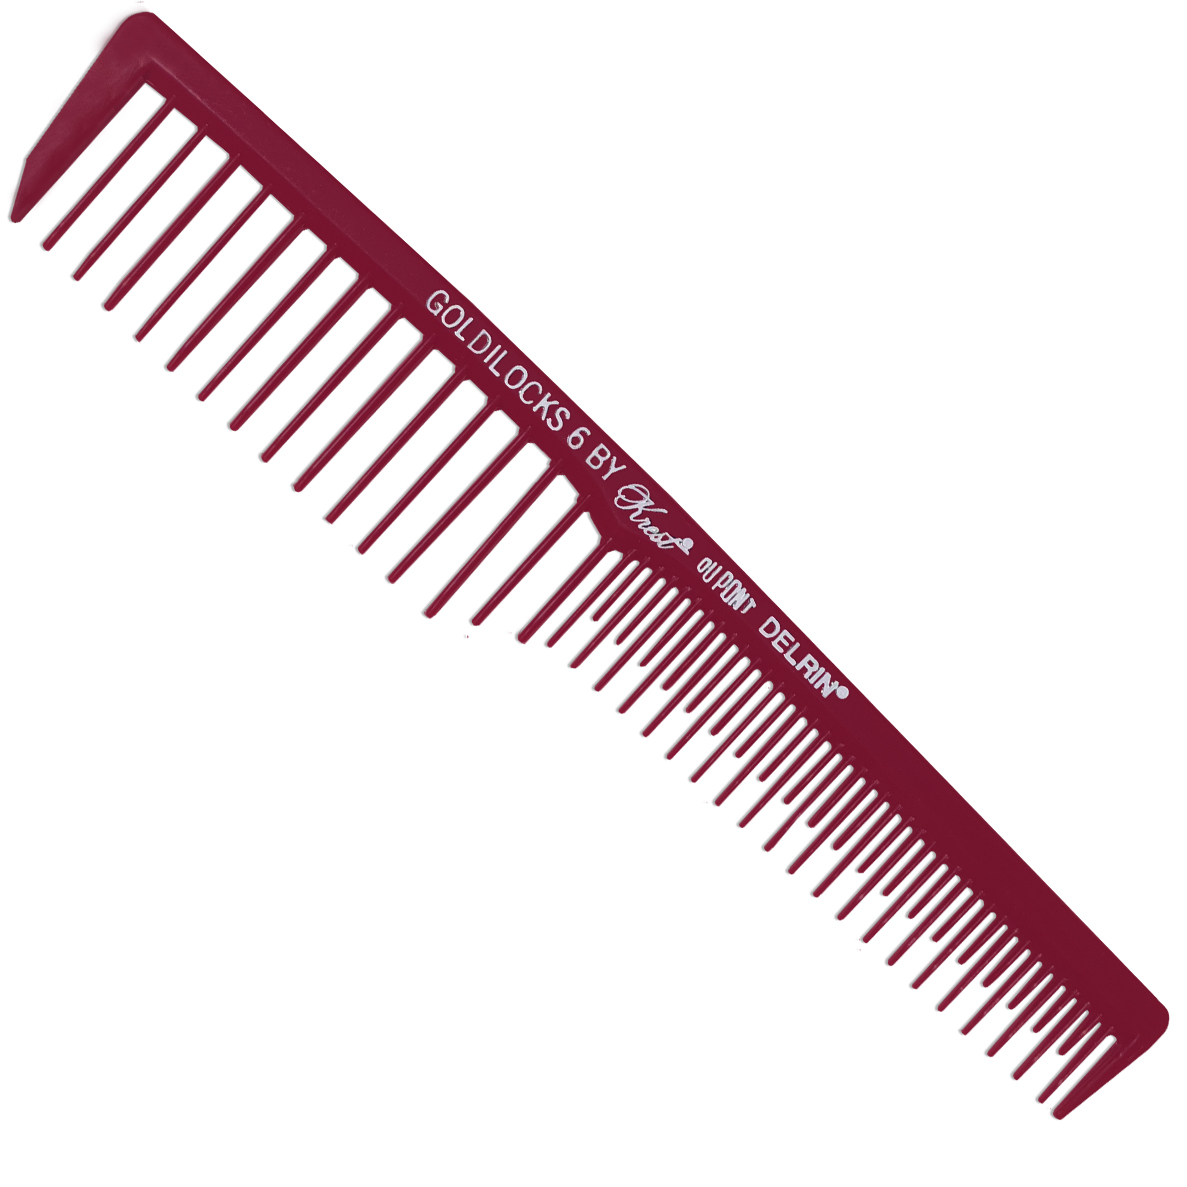 Space tooth finishing/volume comb